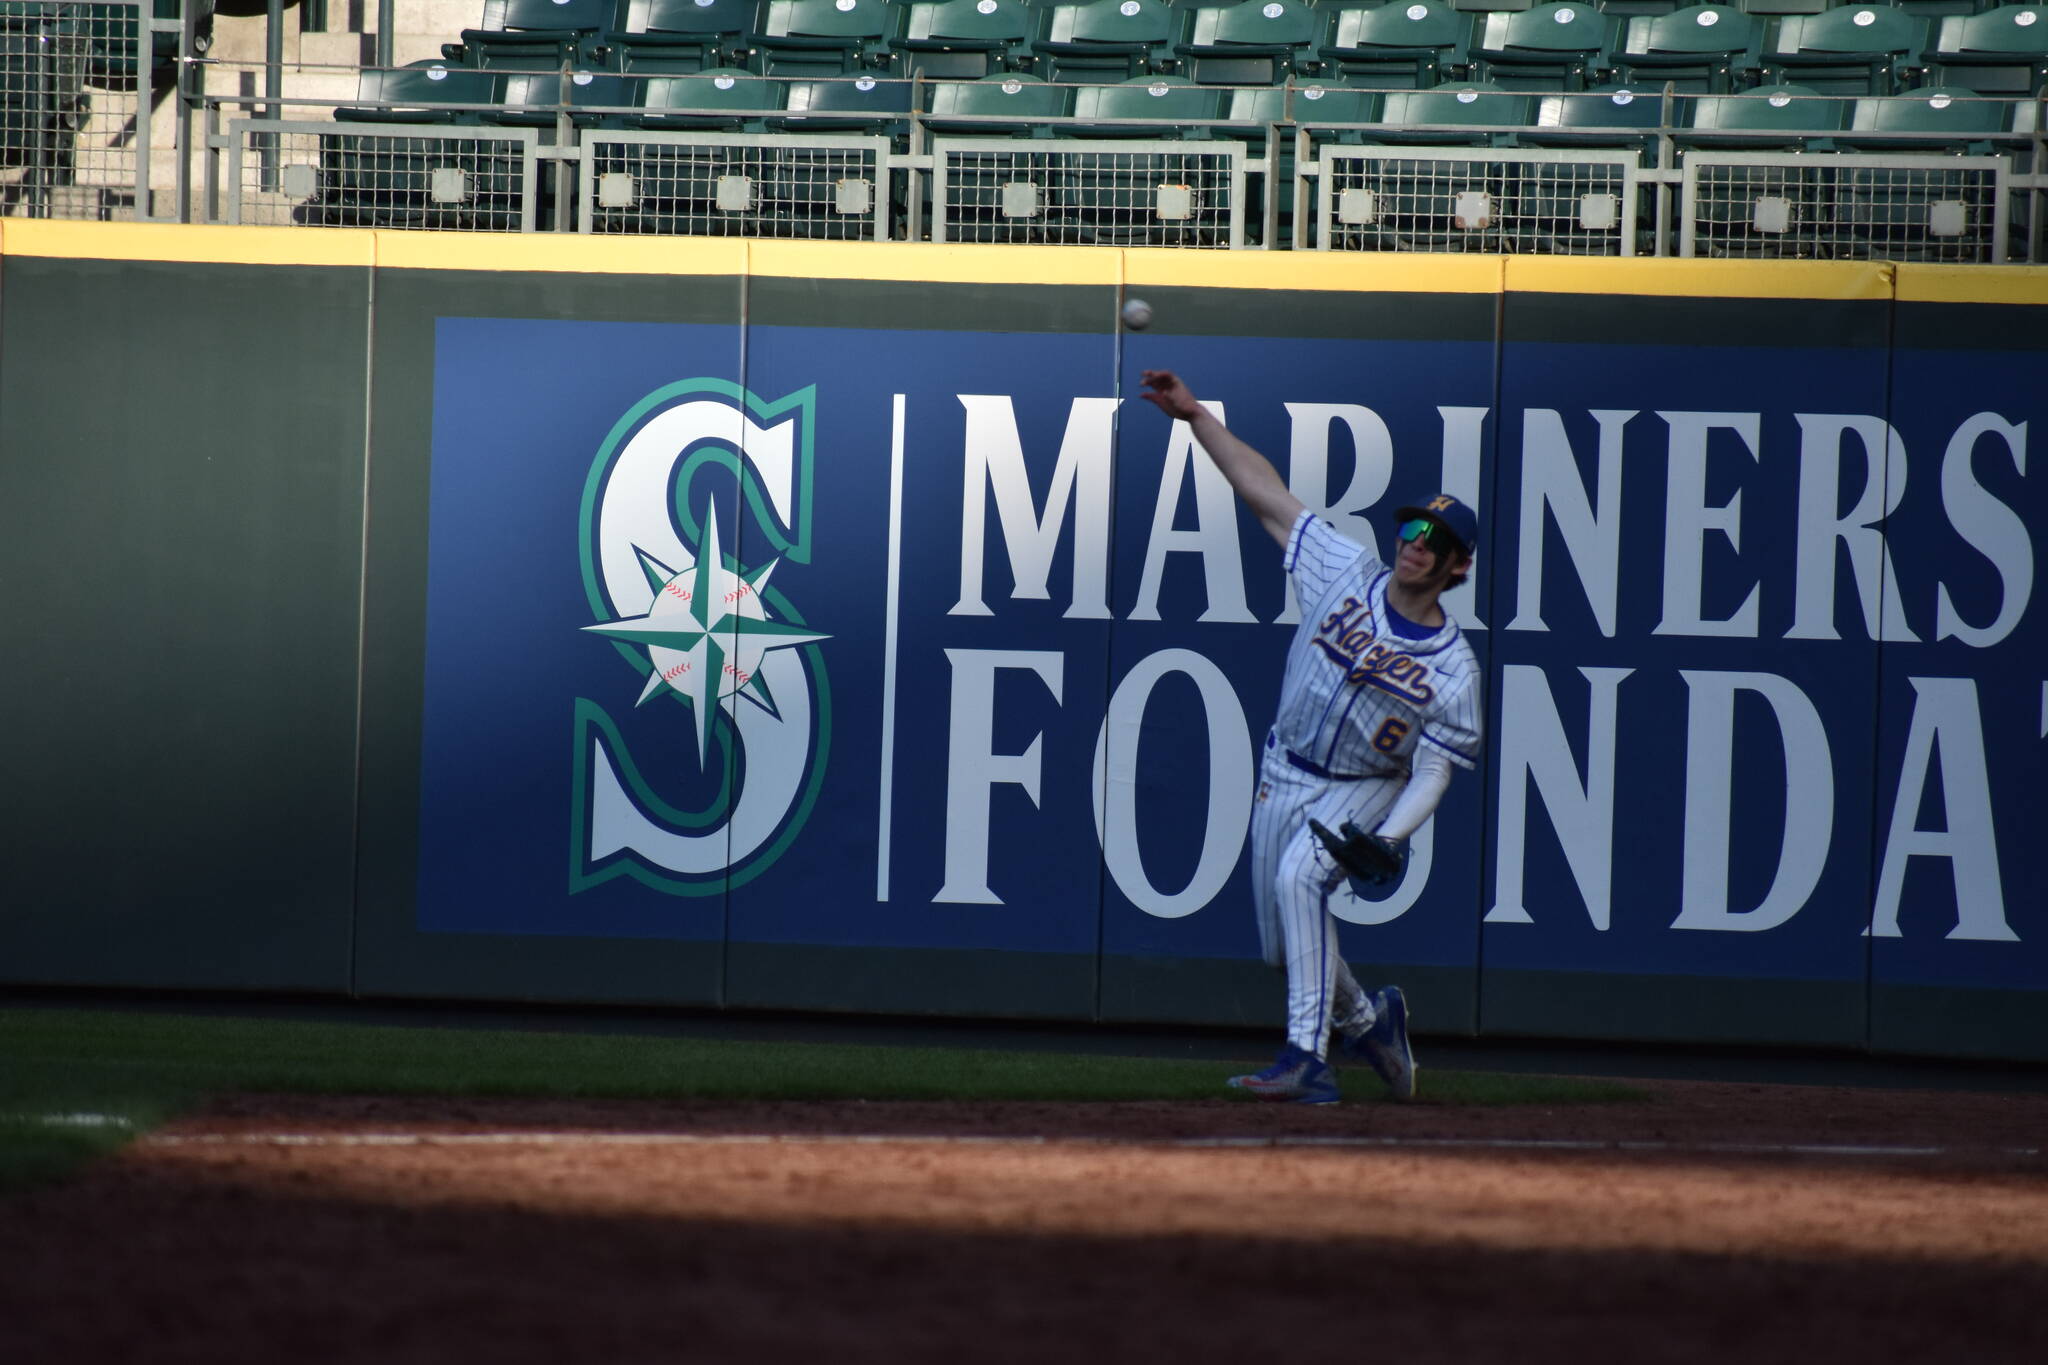 Hazen’s Jason Grossnickle (12) makes a throw to second base during warm-ups.